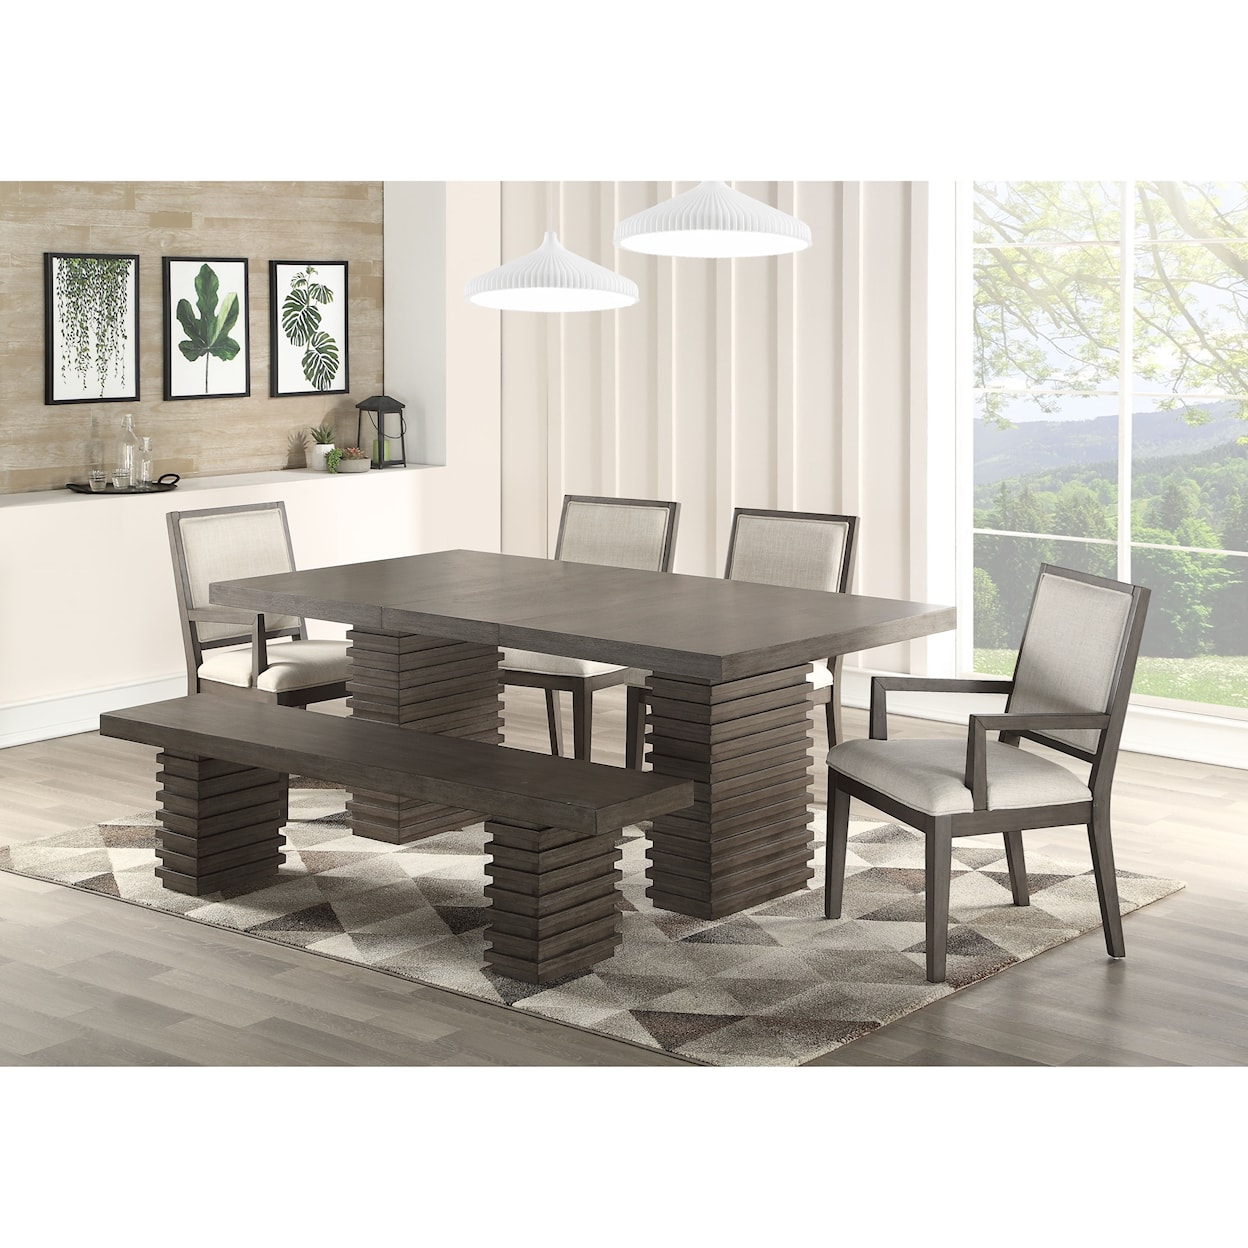 Prime Mila Dining Table and Chair Set with Bench